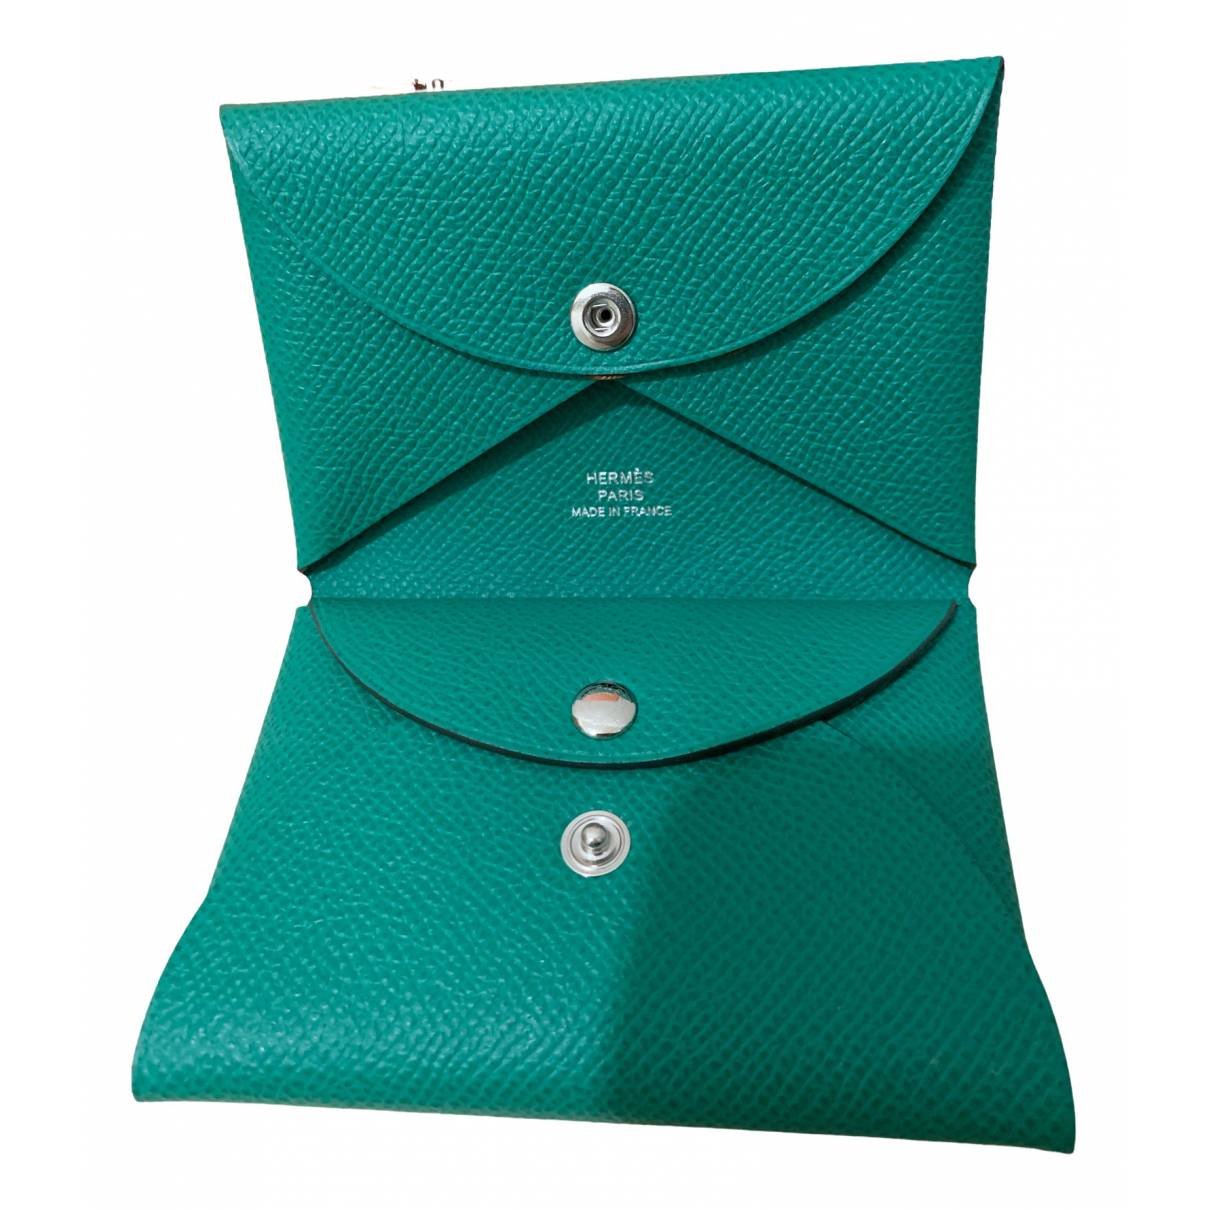 Pre-Owned Hermes Calvi Duo Card Holder Wallet Green Tinged with